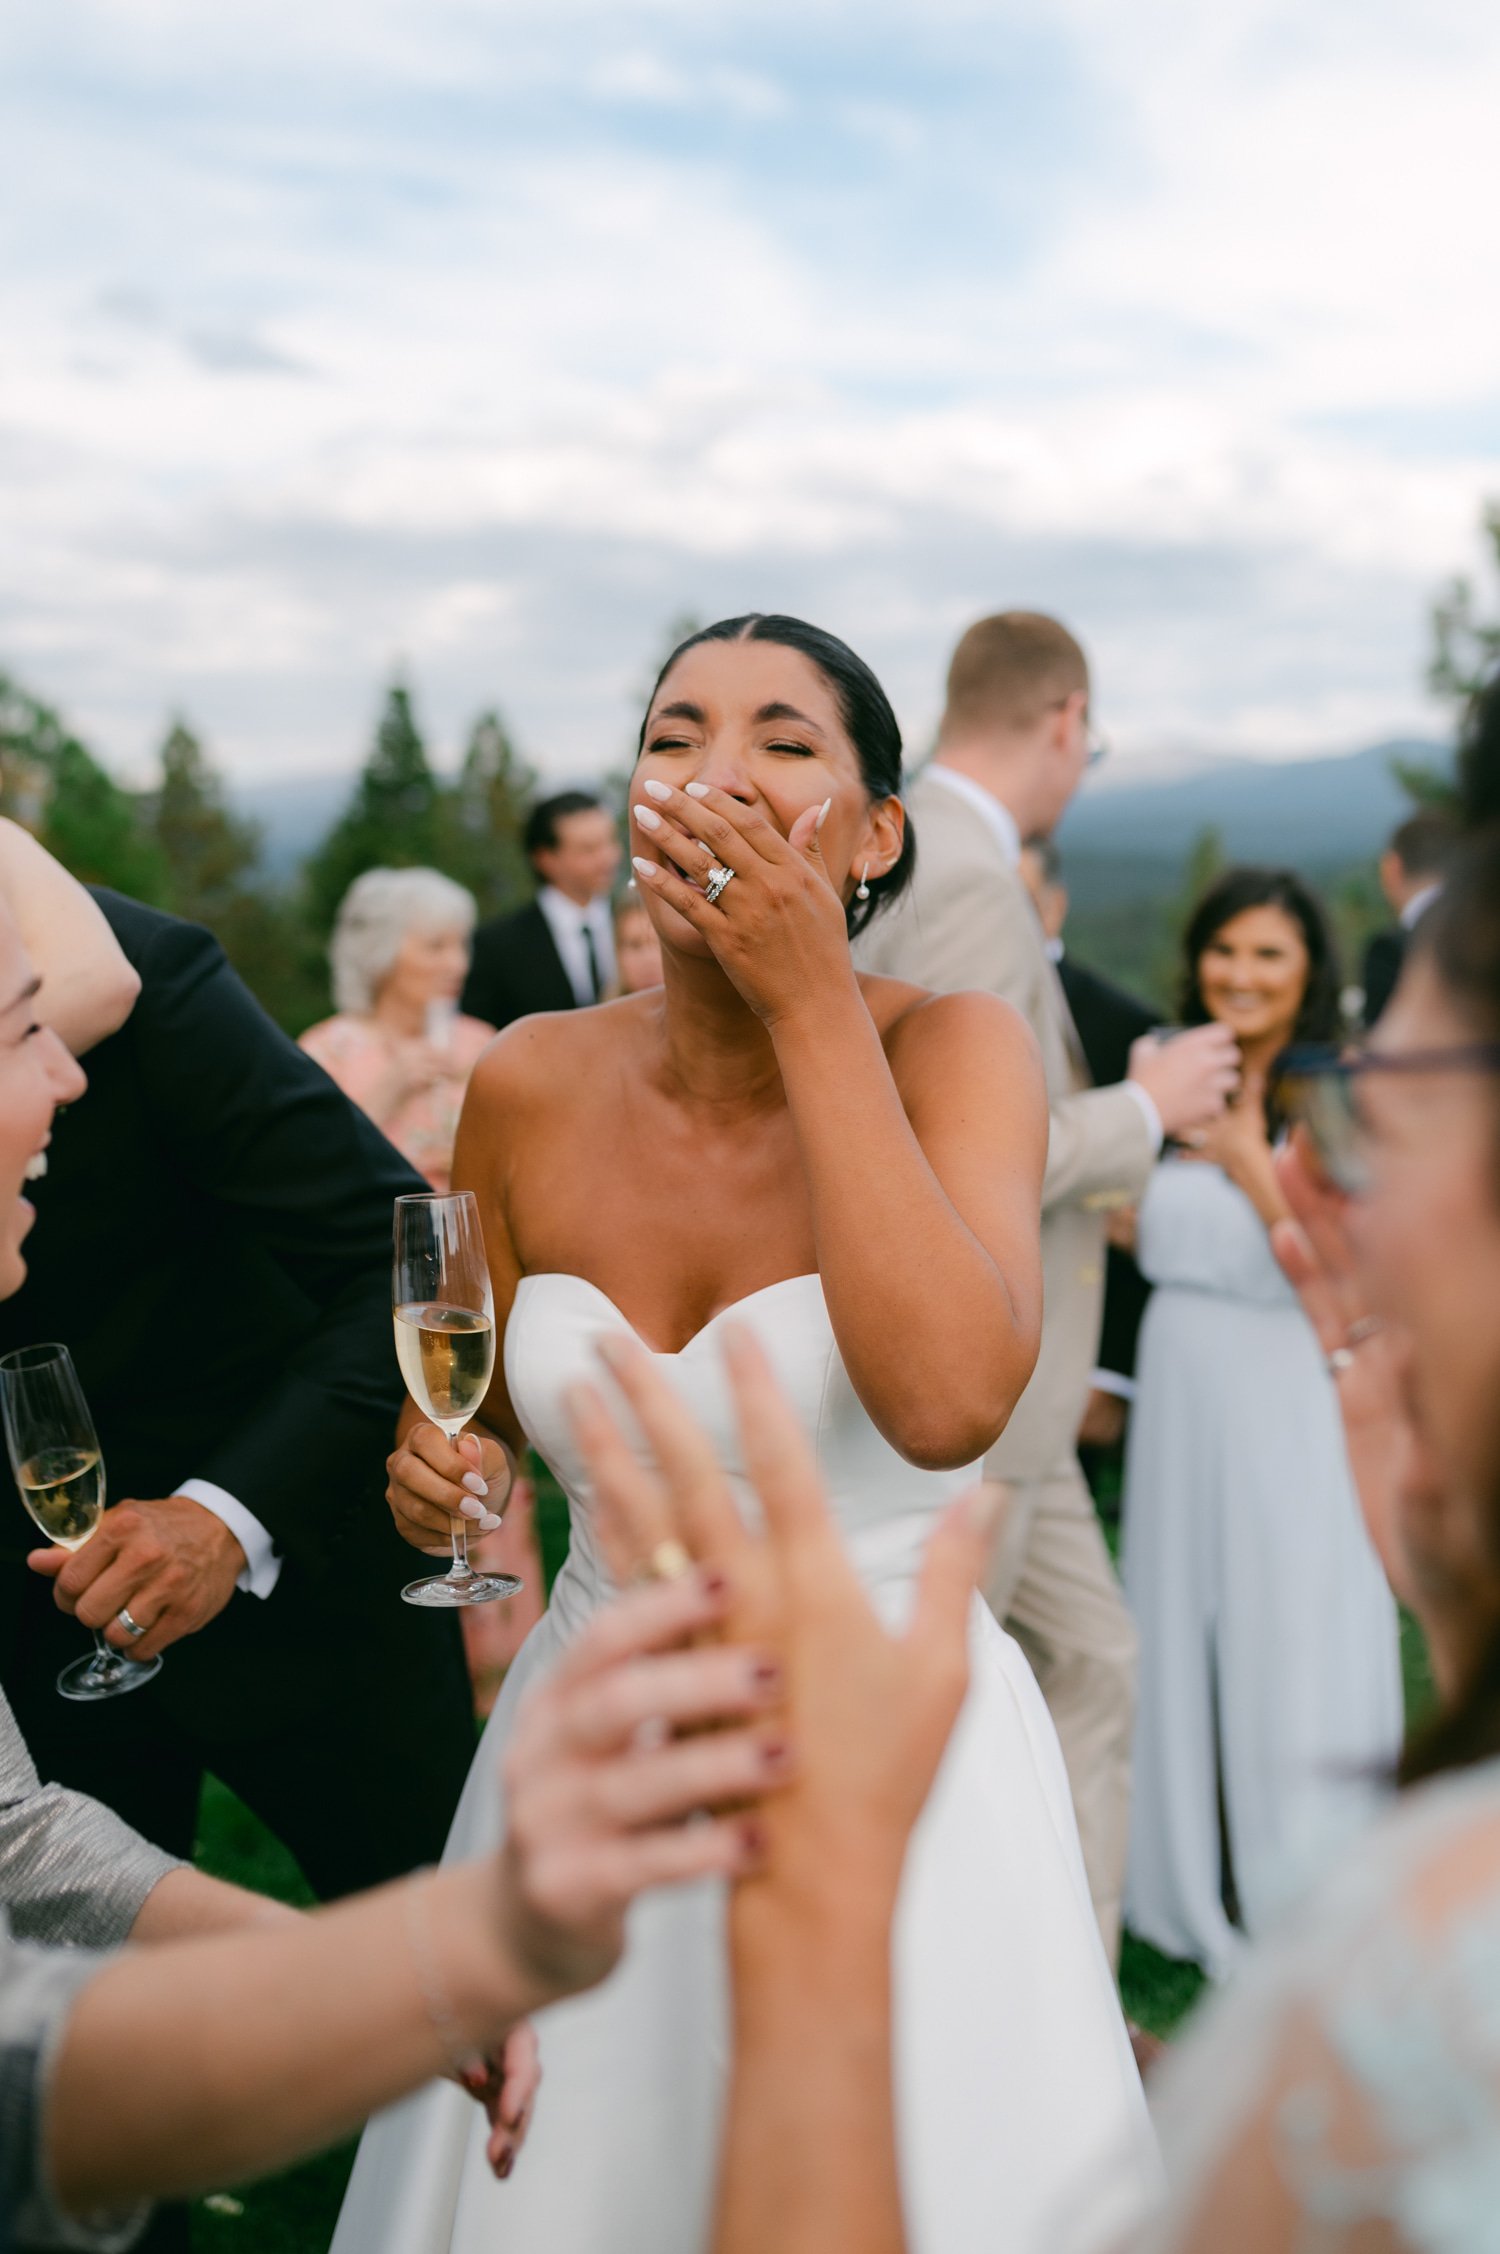 Martis Camp Wedding, photo of the bride laughing with her guests during the afternoon reception